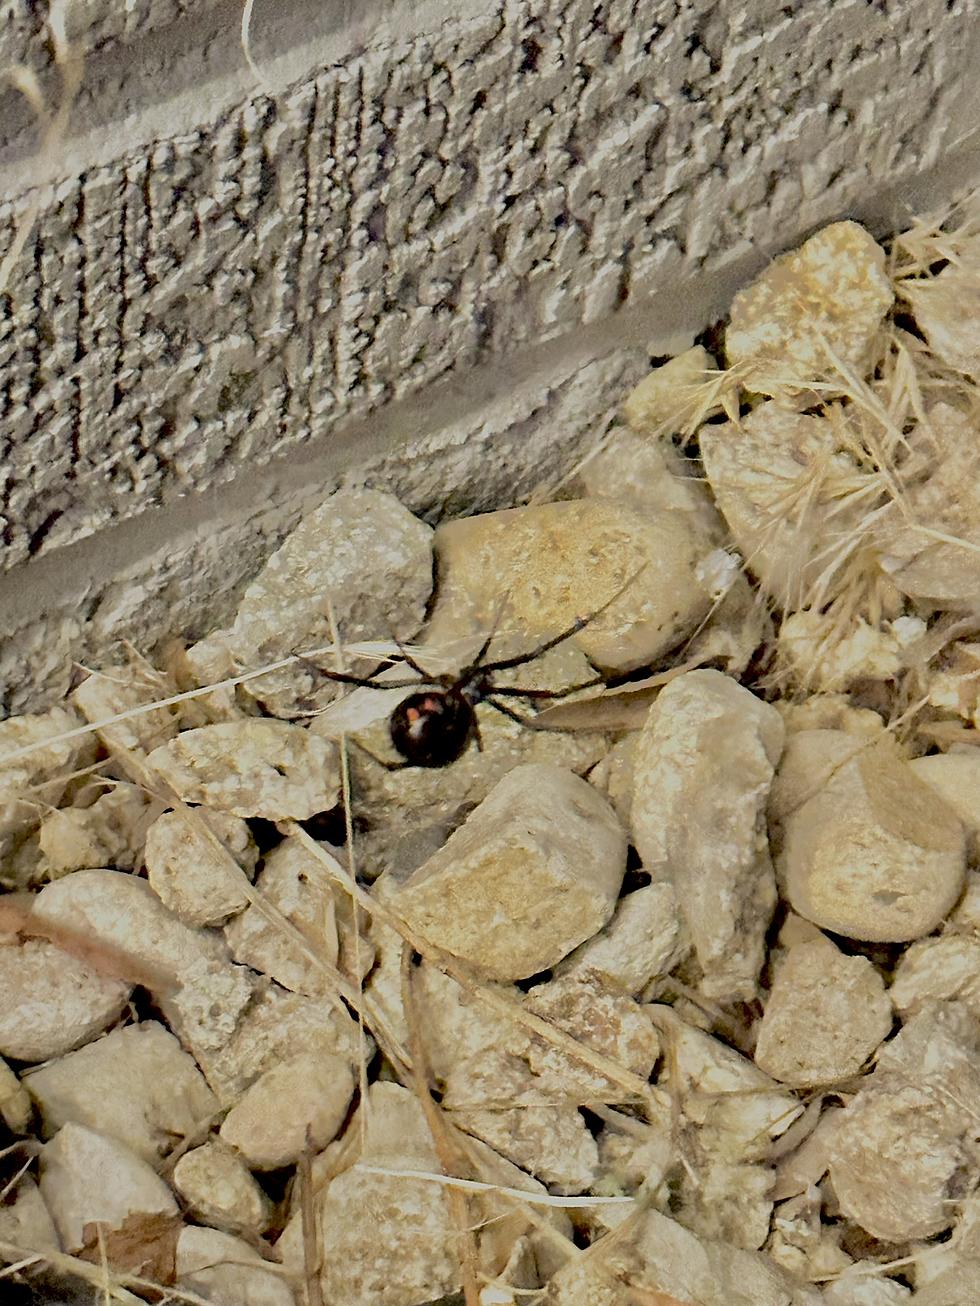 Black Widows Are Invading Idaho Homes And You Need To Be Prepared